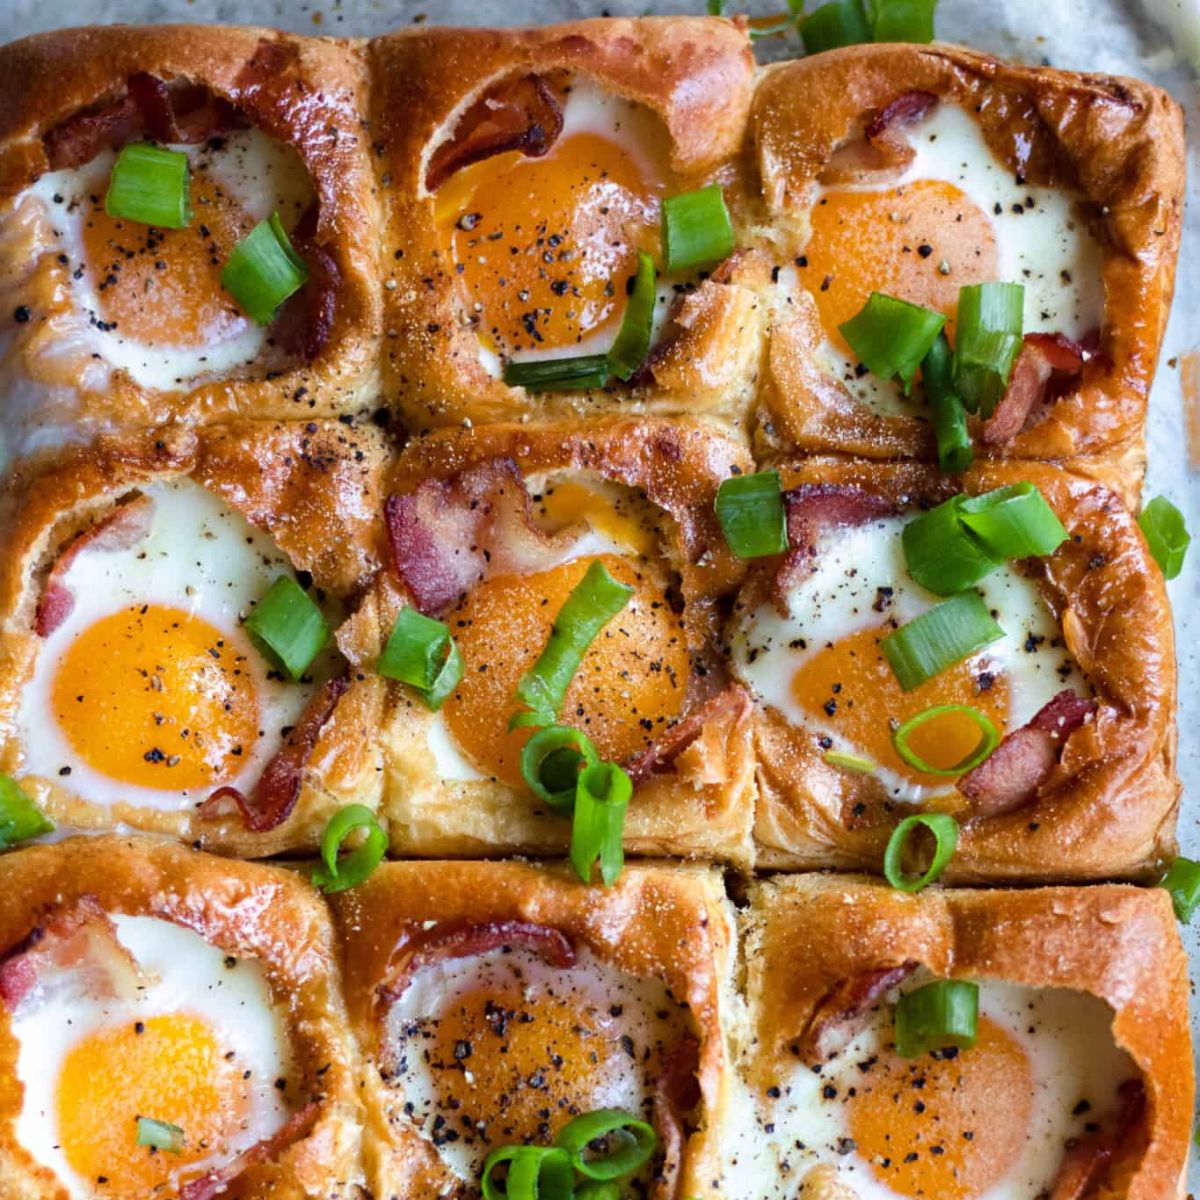 Egg in a Hole Bake sprinkled with green onions.